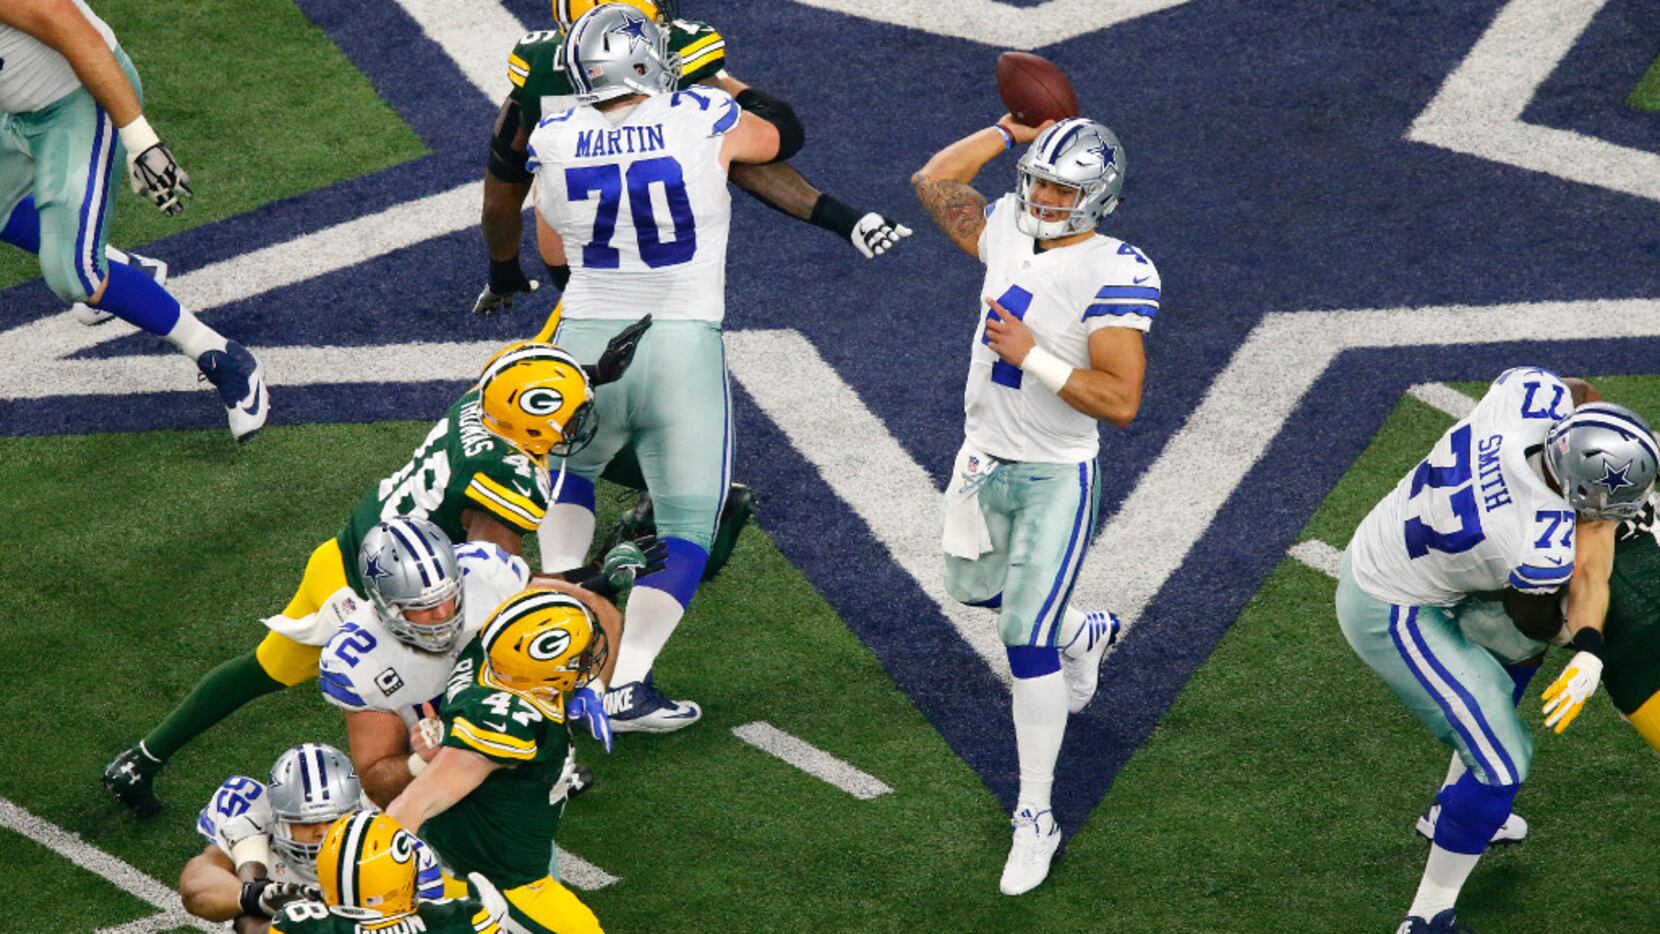 Sturm: Where Packers game got away from Cowboys, and what